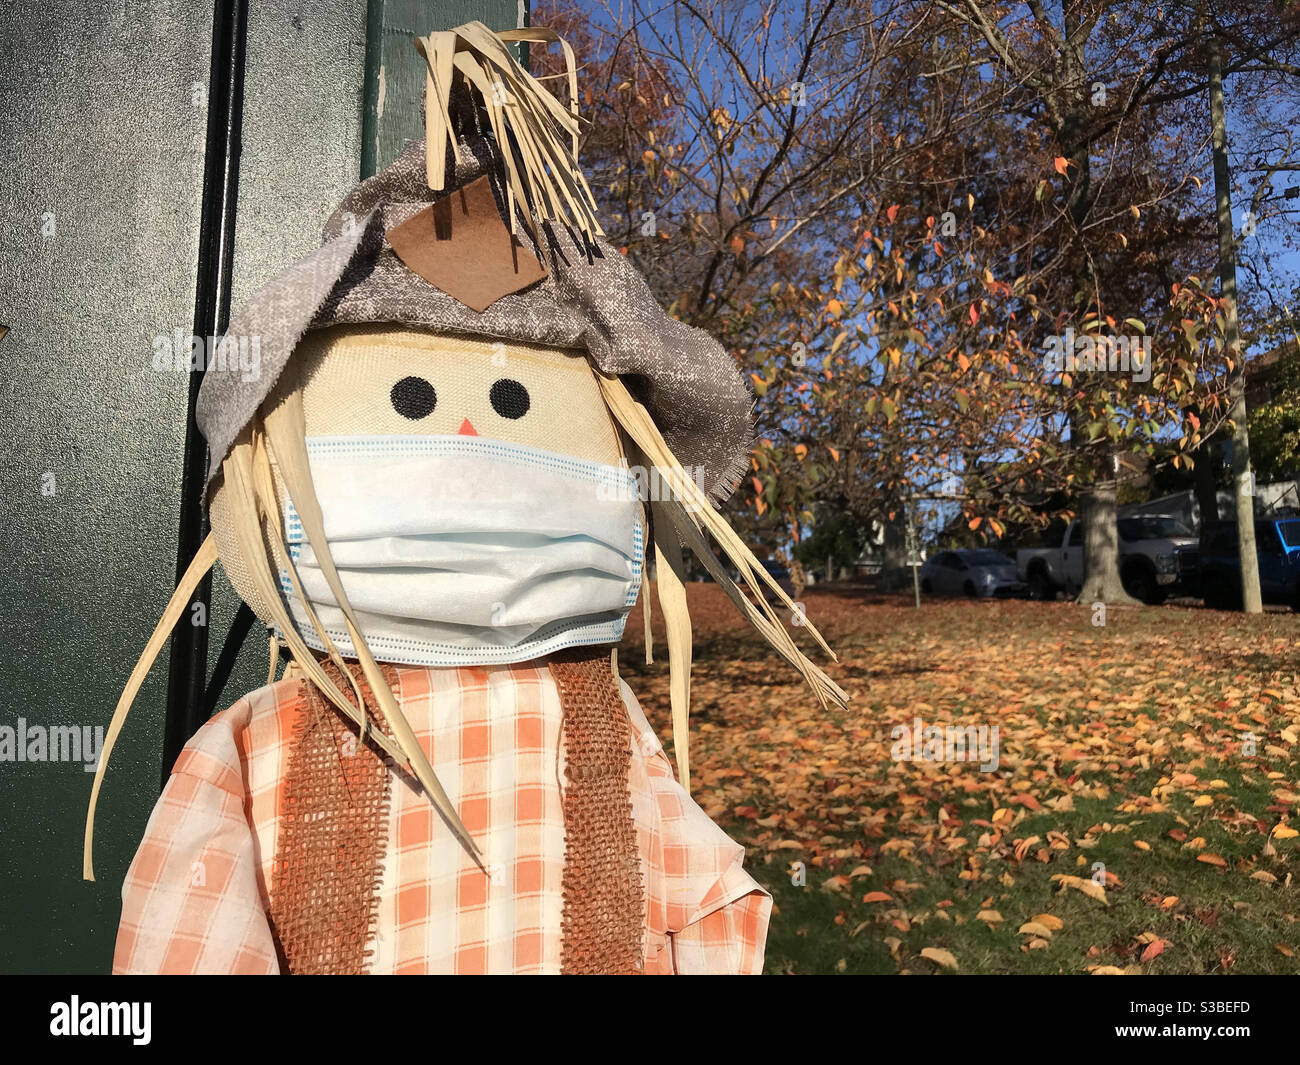 Scarecrow Wearing A Face Mask During The COVID-19, Coronavirus Pandemic, Autumn Decor Stock Photo